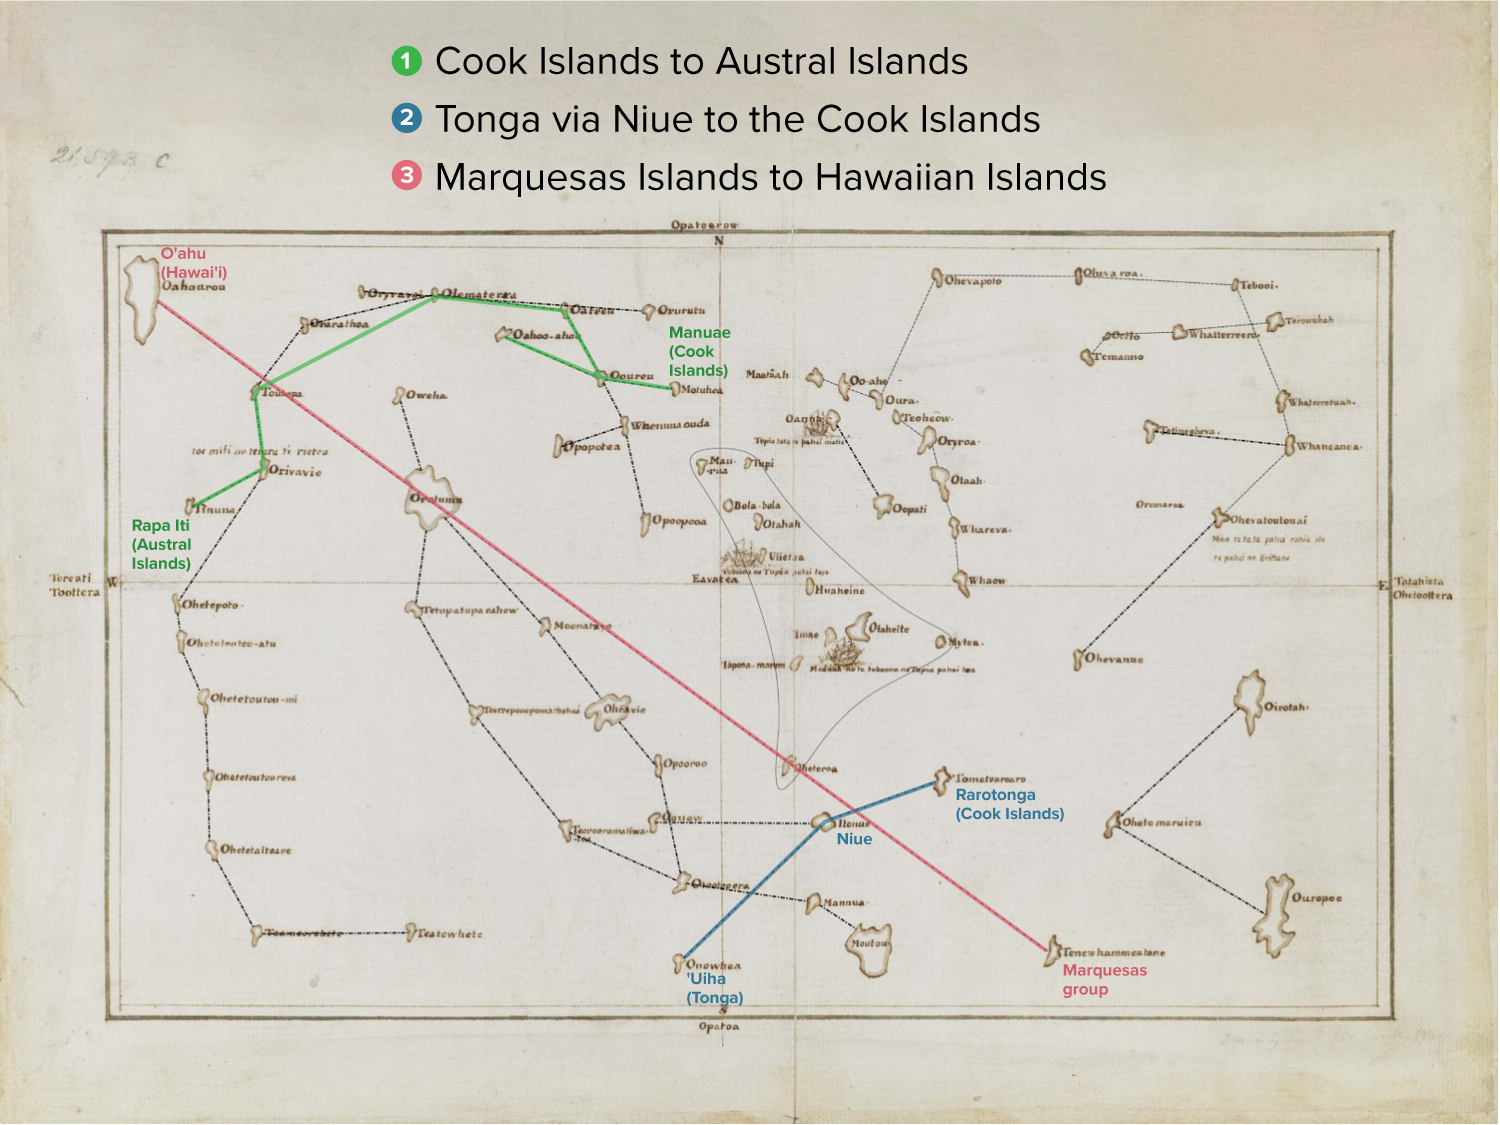 A marked-up version of Tupaia’s map suggests three specific routes: From the Marquesas to Hawai‘i; from Tonga to the Cook Islands; and the Cook Islands to the Austral Islands.